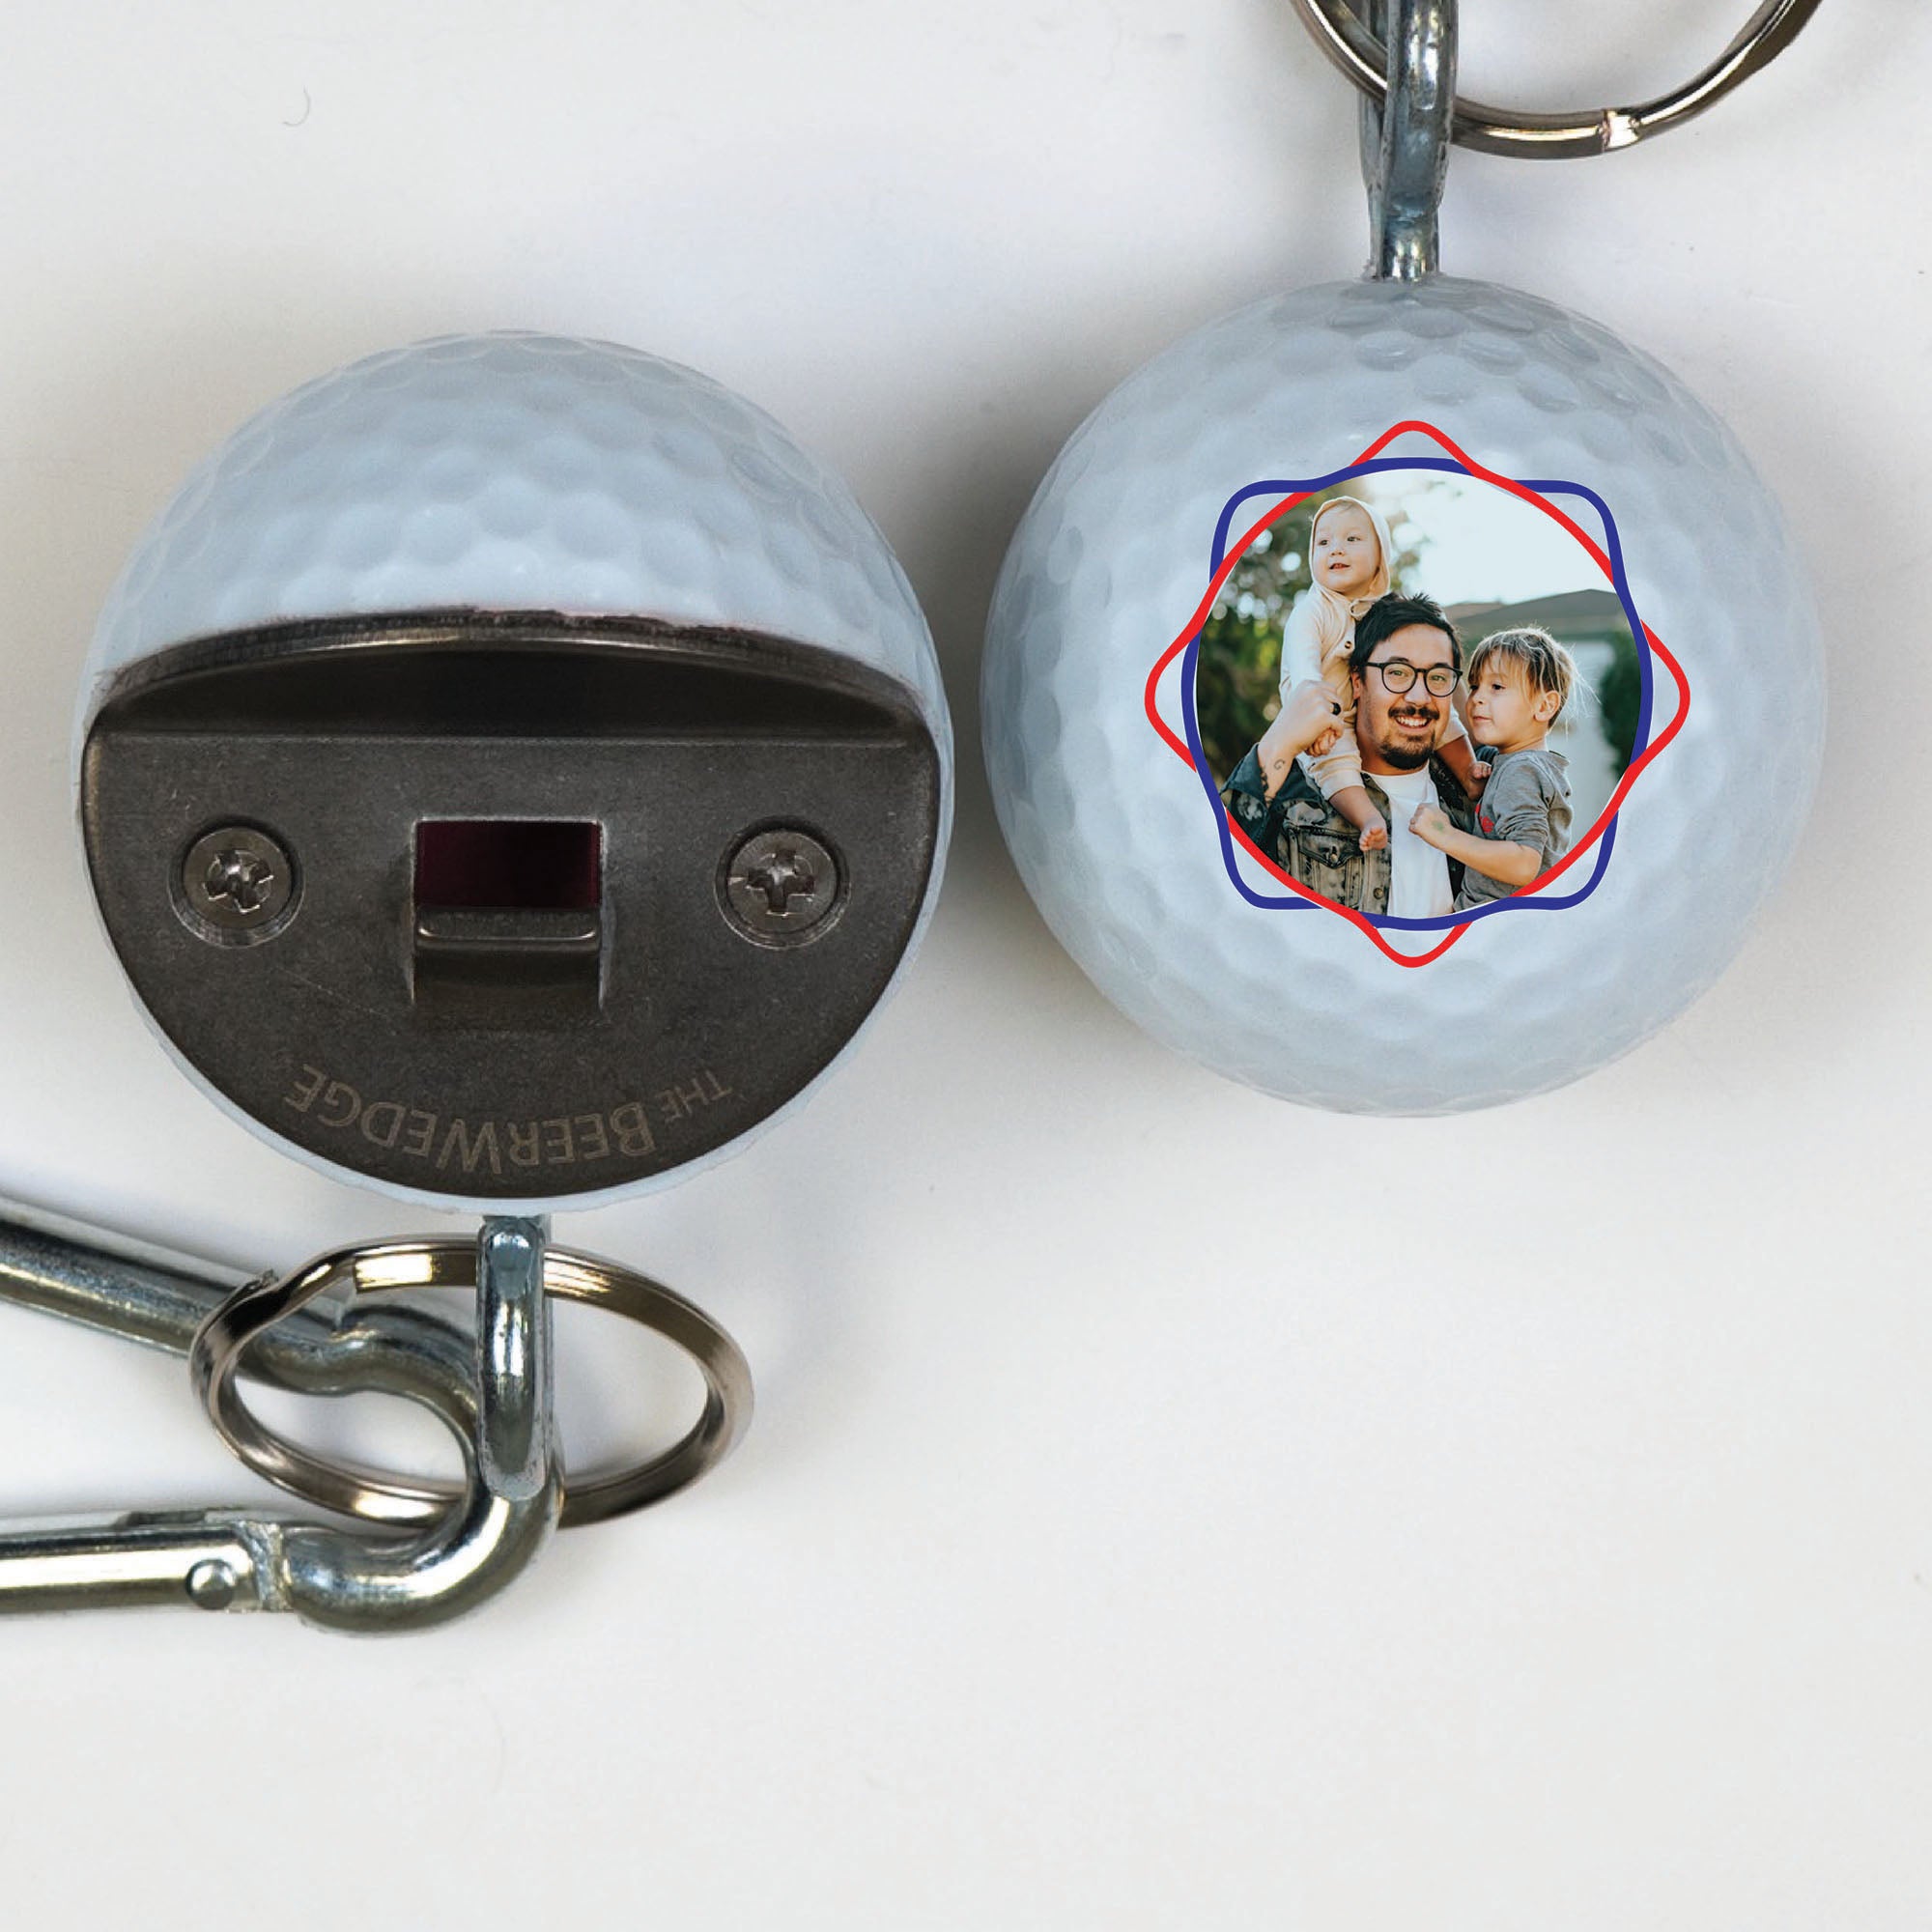 Golf Ball Bottle Opener, Dad & Father's Day Gifts